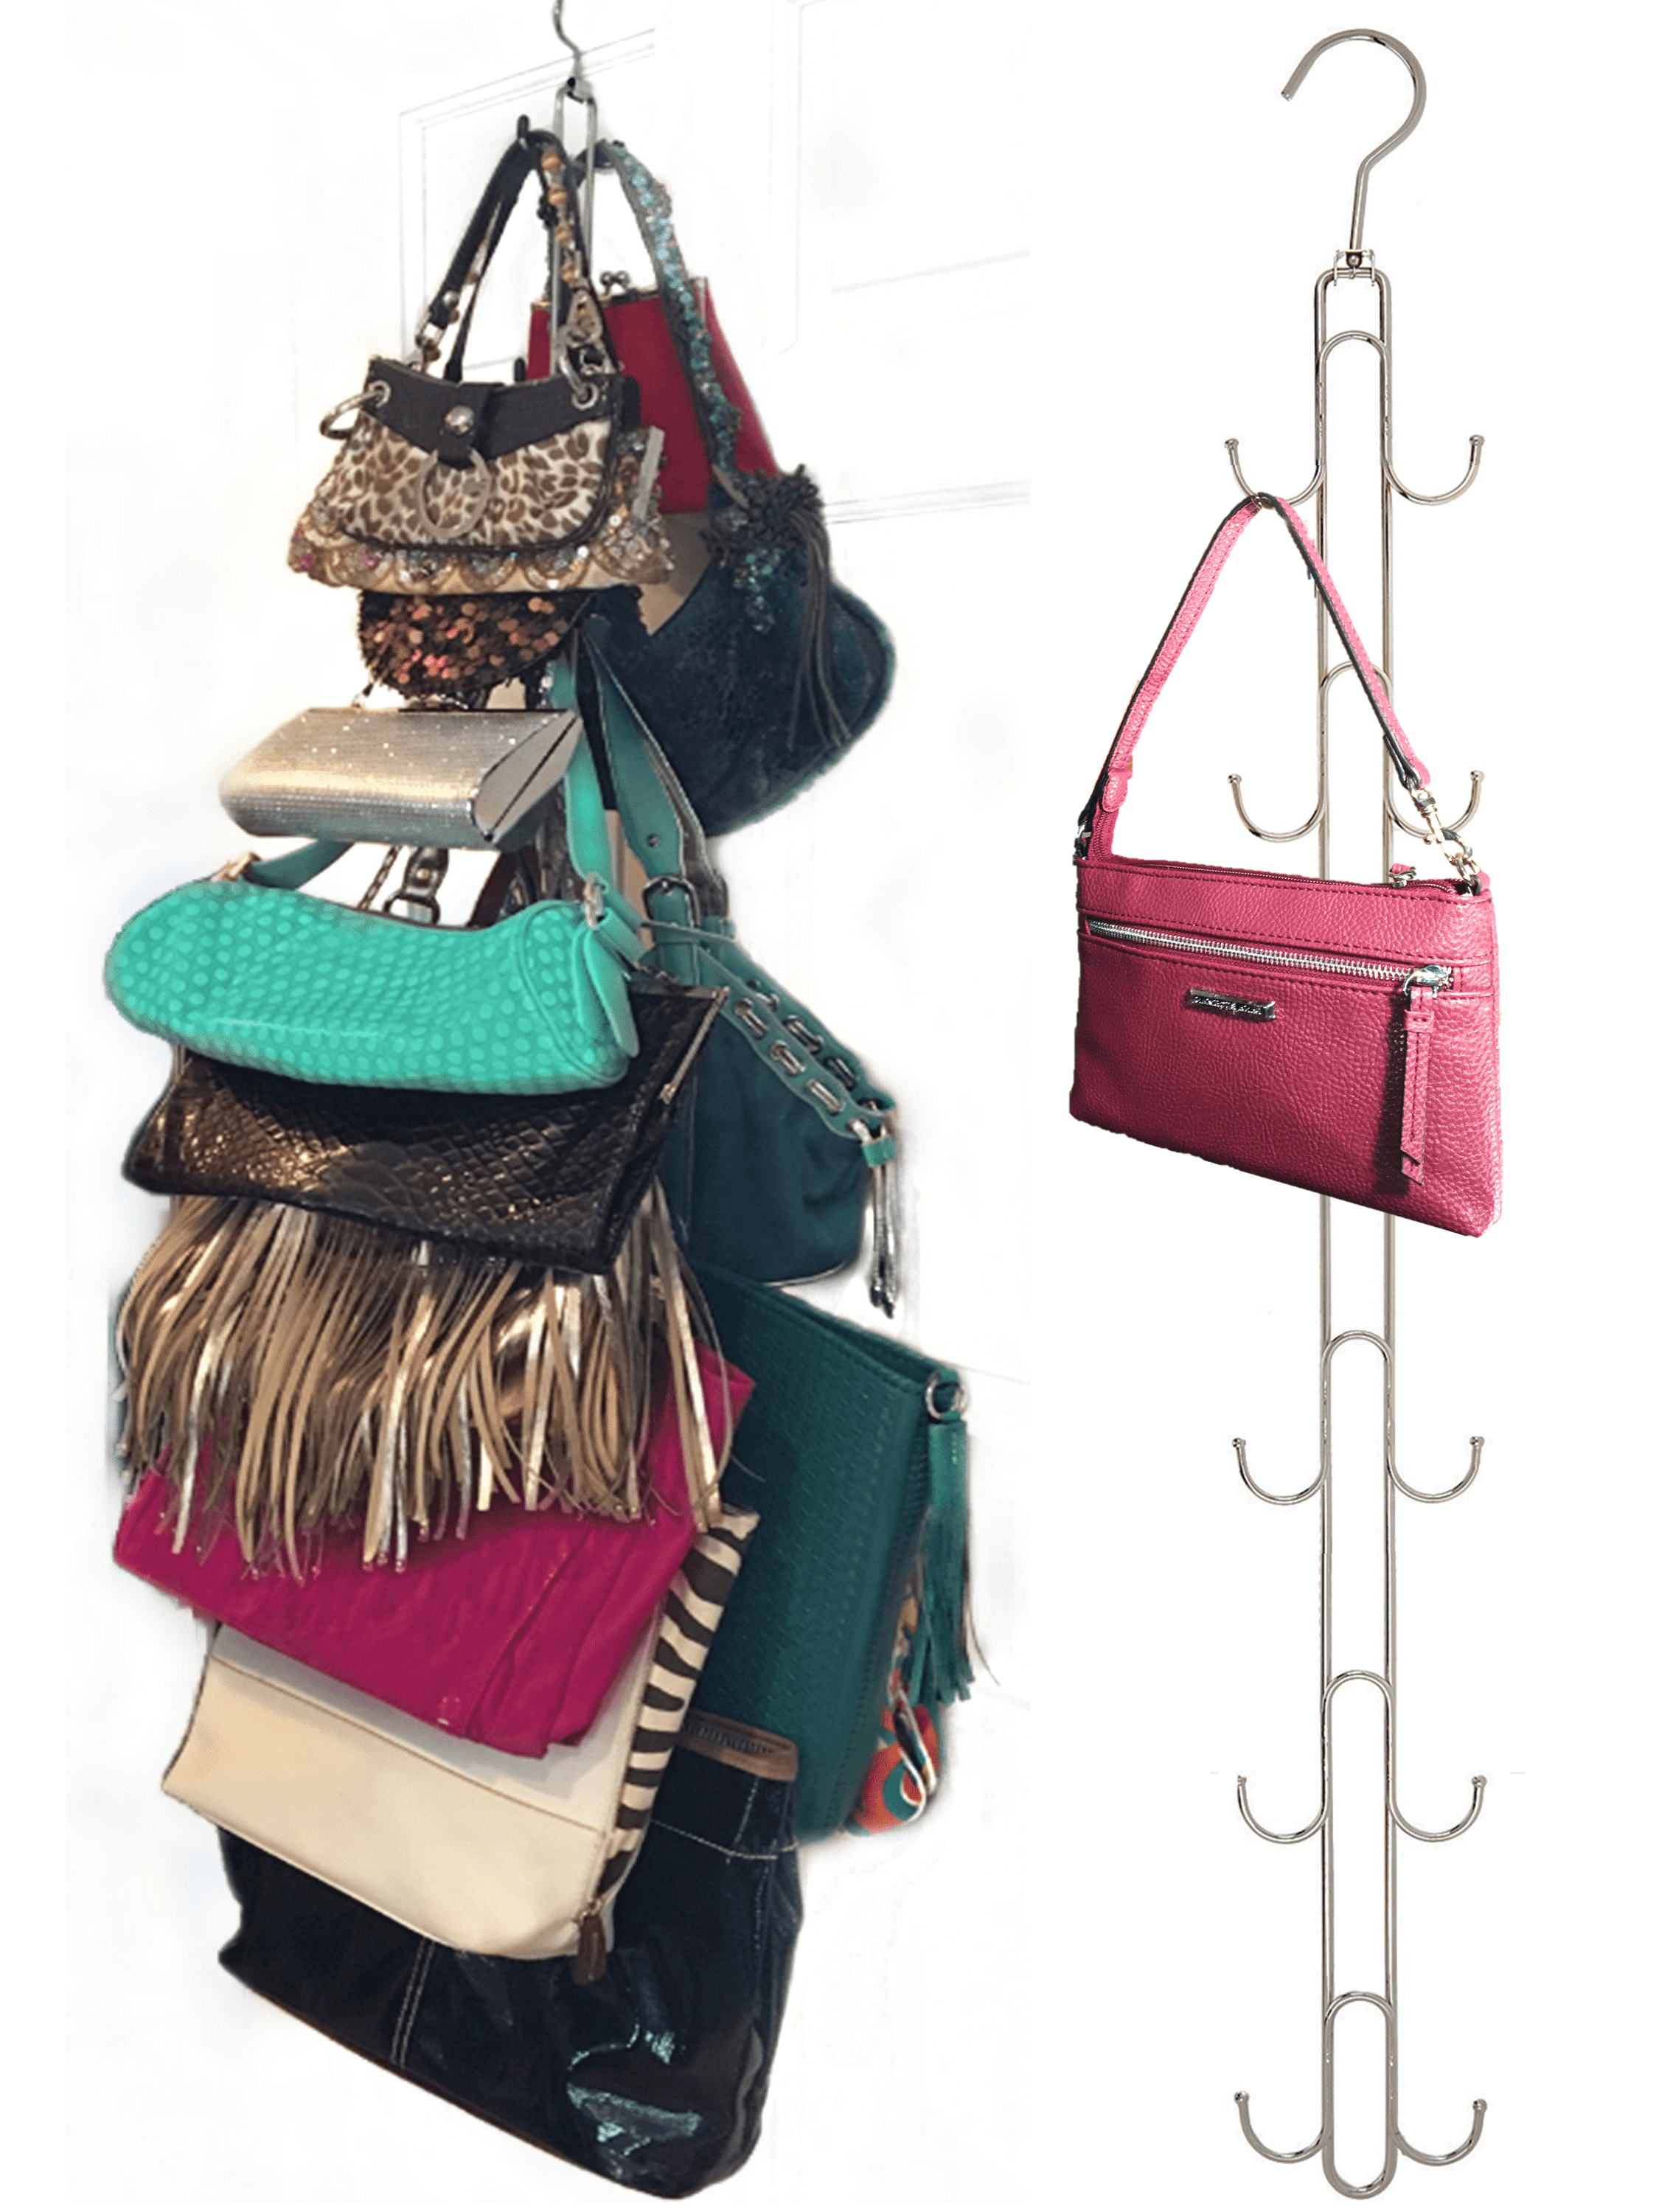 Handbag Storage: How to Store Your Most Prized Purses | Architectural Digest